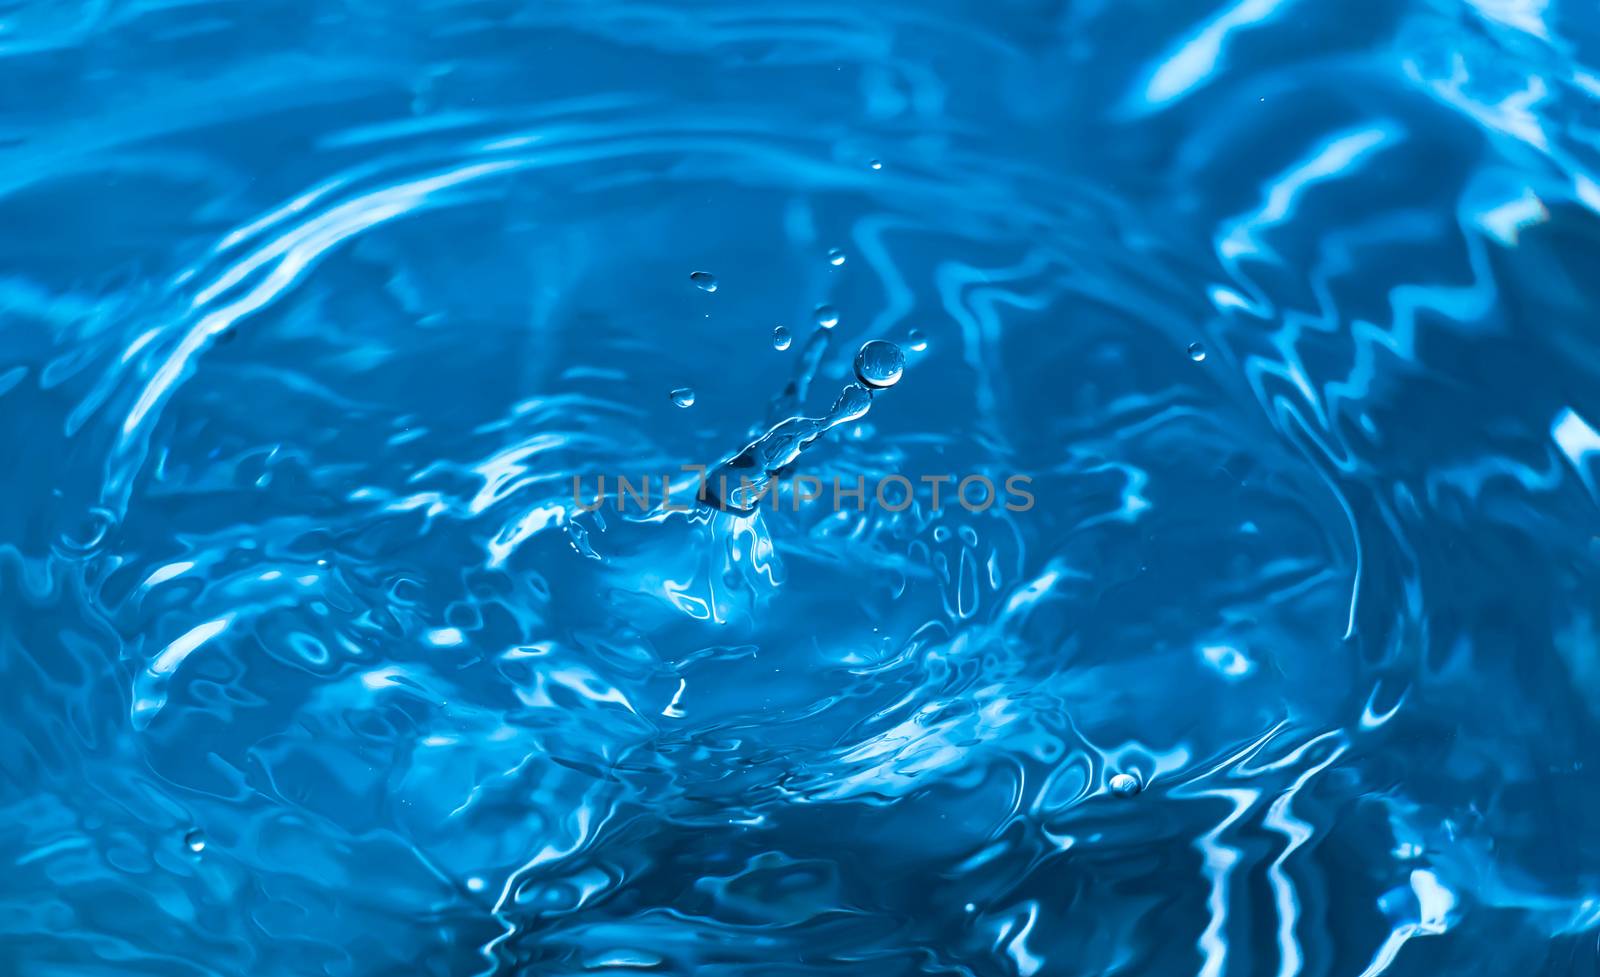 Water splash close-up. Drop of water. Blue water drop. Falling blue water surface with splash and air bubbles.